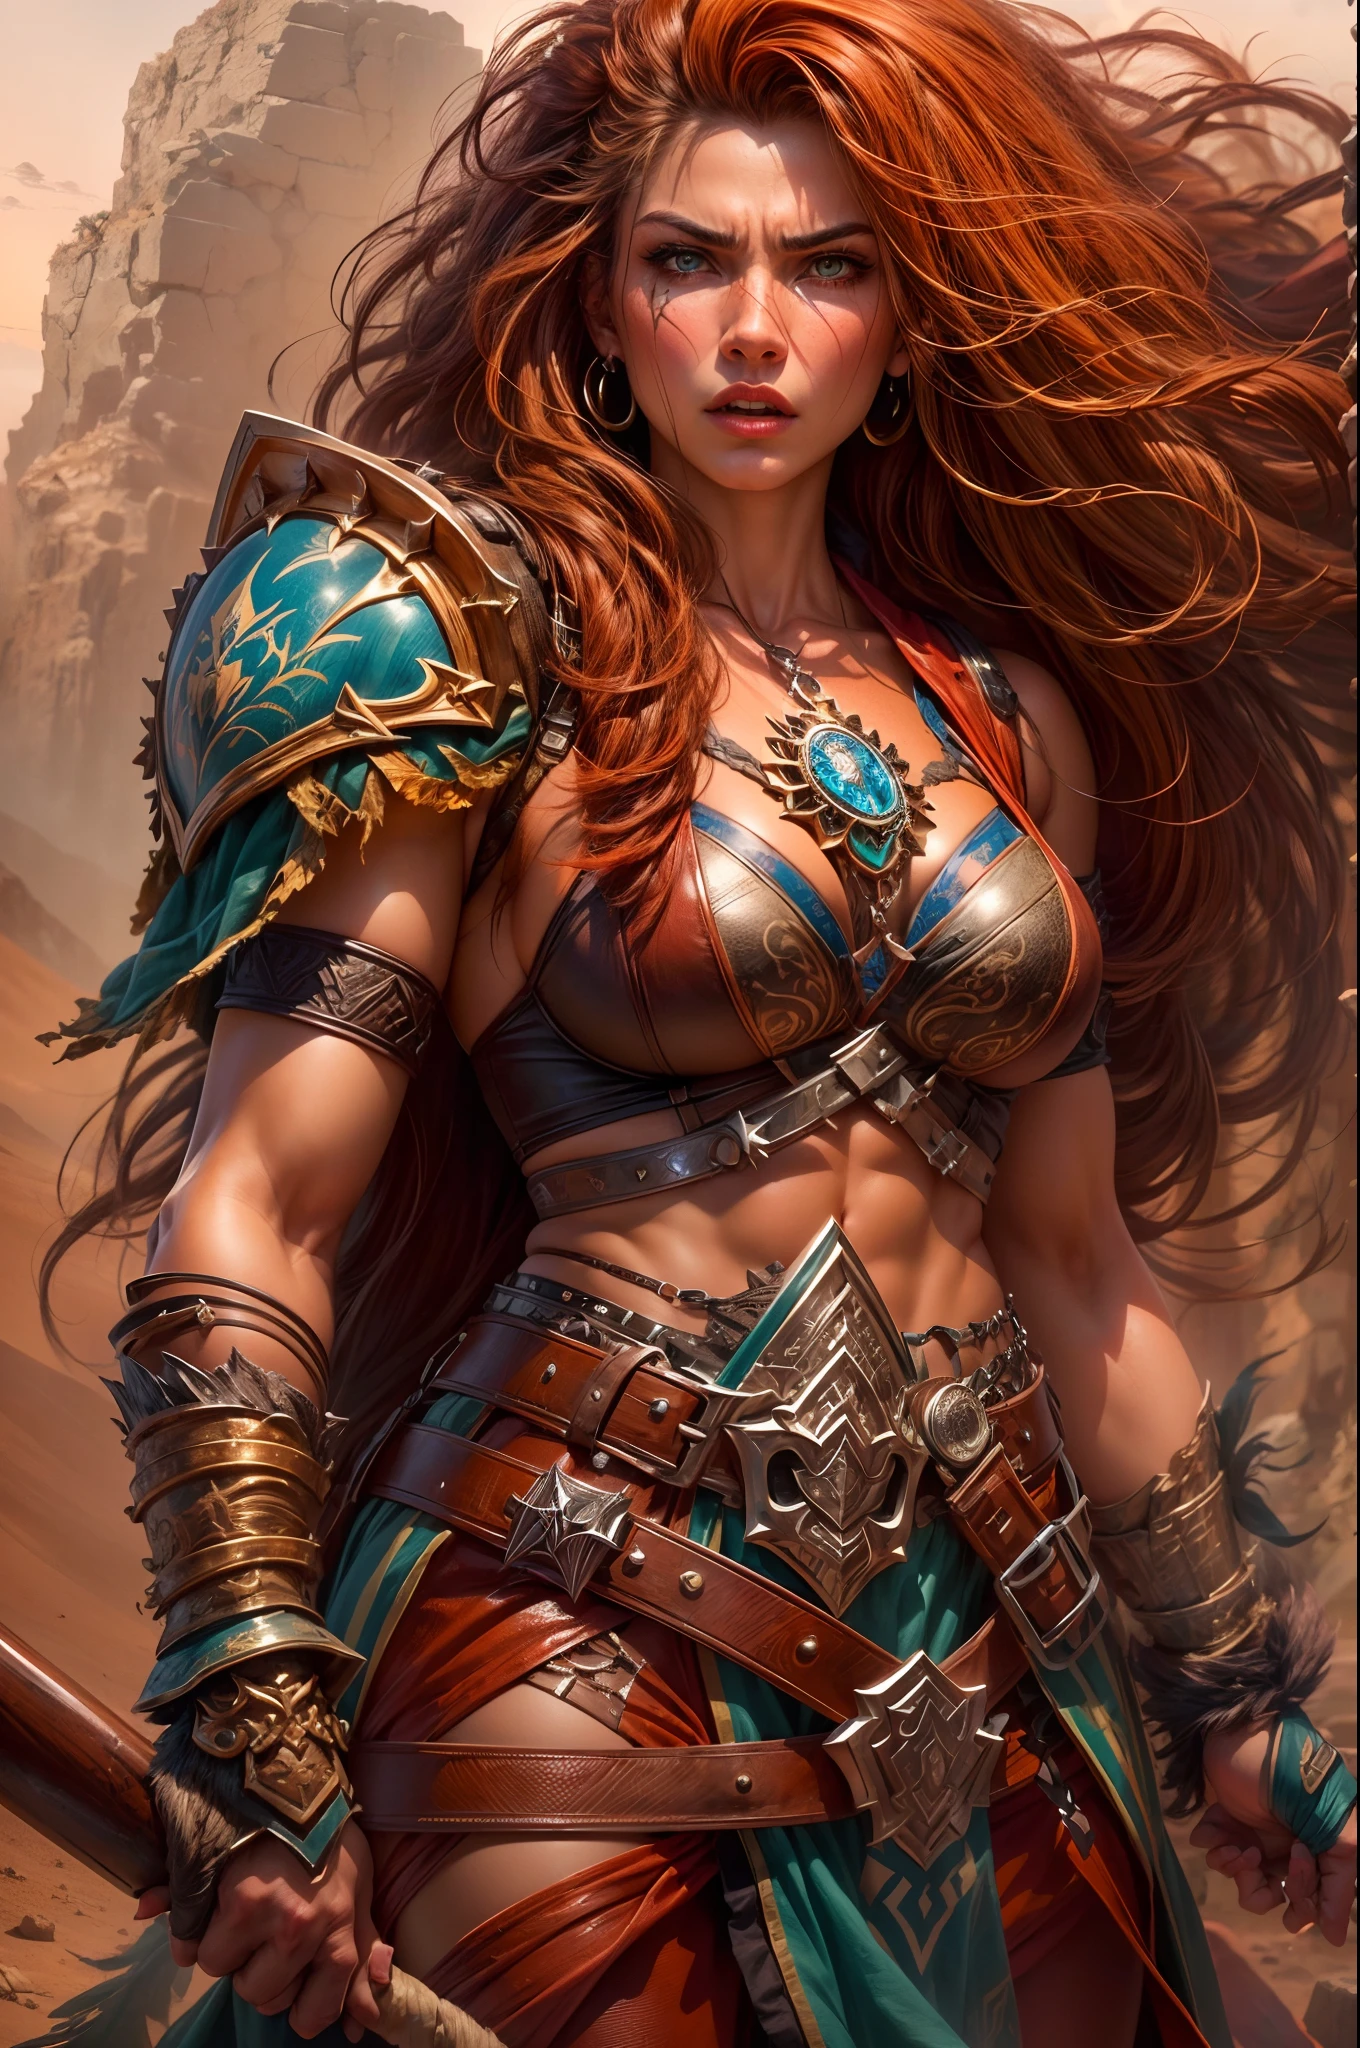 (best quality,highres,realistic:1.2),detailed red long flowing hair,(beautiful,detailed:1.1) face with piercing blue eyes, (voluptuous,fit:1.1) body with well-defined muscular arms and legs, (fierce:1.1) expression, (confident:1.1) posture, (fierce:0.9) and provocative pose, (strong and powerful:1.1),(leather, revealing:1.2) barbarian outfit, (intricate, detailed:1.1) armor with tribal patterns, (weapon:1.1) in hand, standing in a desert landscape, (sandy, vast:1.1), (harsh:1.1) lighting with a warm sunset glow, (dramatic:1.1) shadows emphasizing her physique, (intense:1.1) and vibrant colors, showing her (fierce:0.9) nature and (dominant:1.1) presence, (dangerous:1.1) aura, (adventurous:1.1) atmosphere, (fantasy:1.1) setting, (epic:1.1) and (powerful:1.1), evoking a sense of (freedom:1.1) and (strength:1.1).